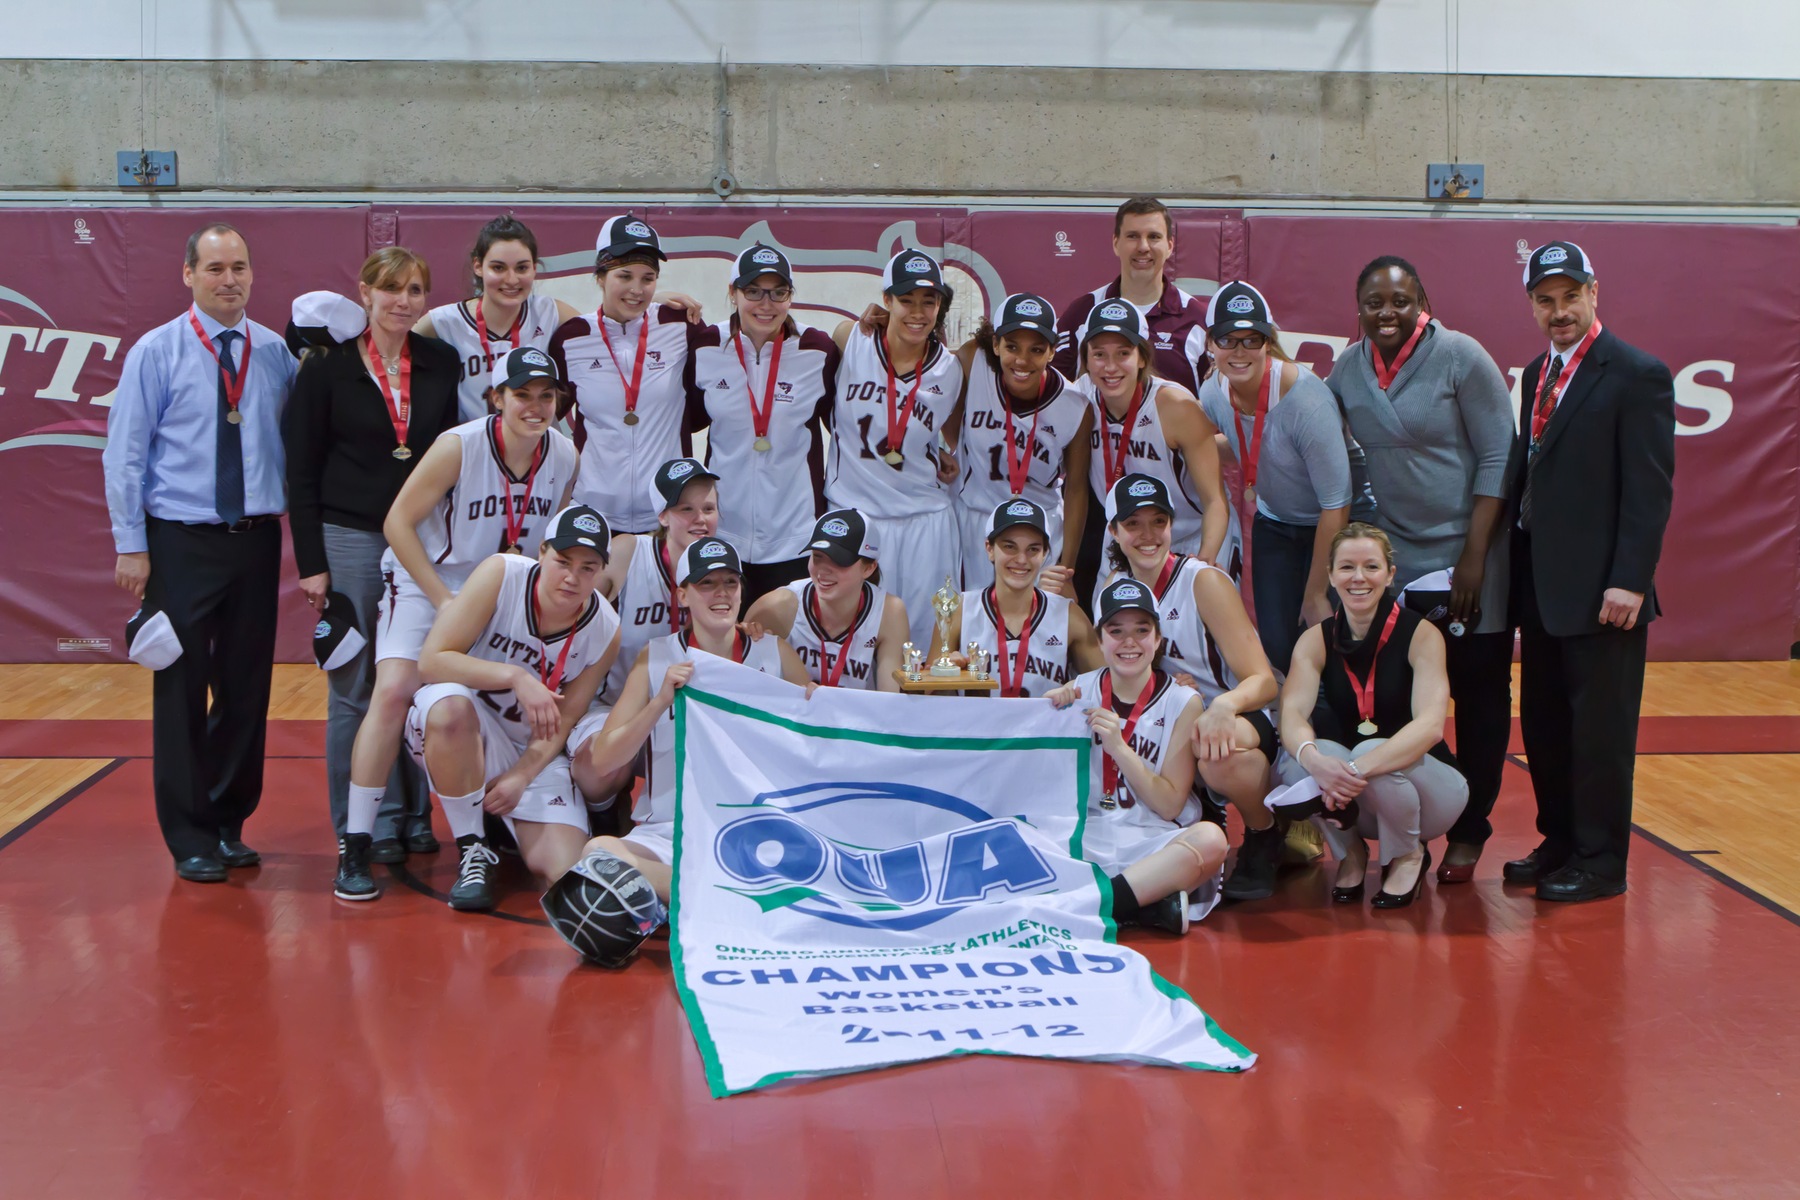 Women's basketball team celebrates with 2012 OUA championship banner at Montpetit Hall.